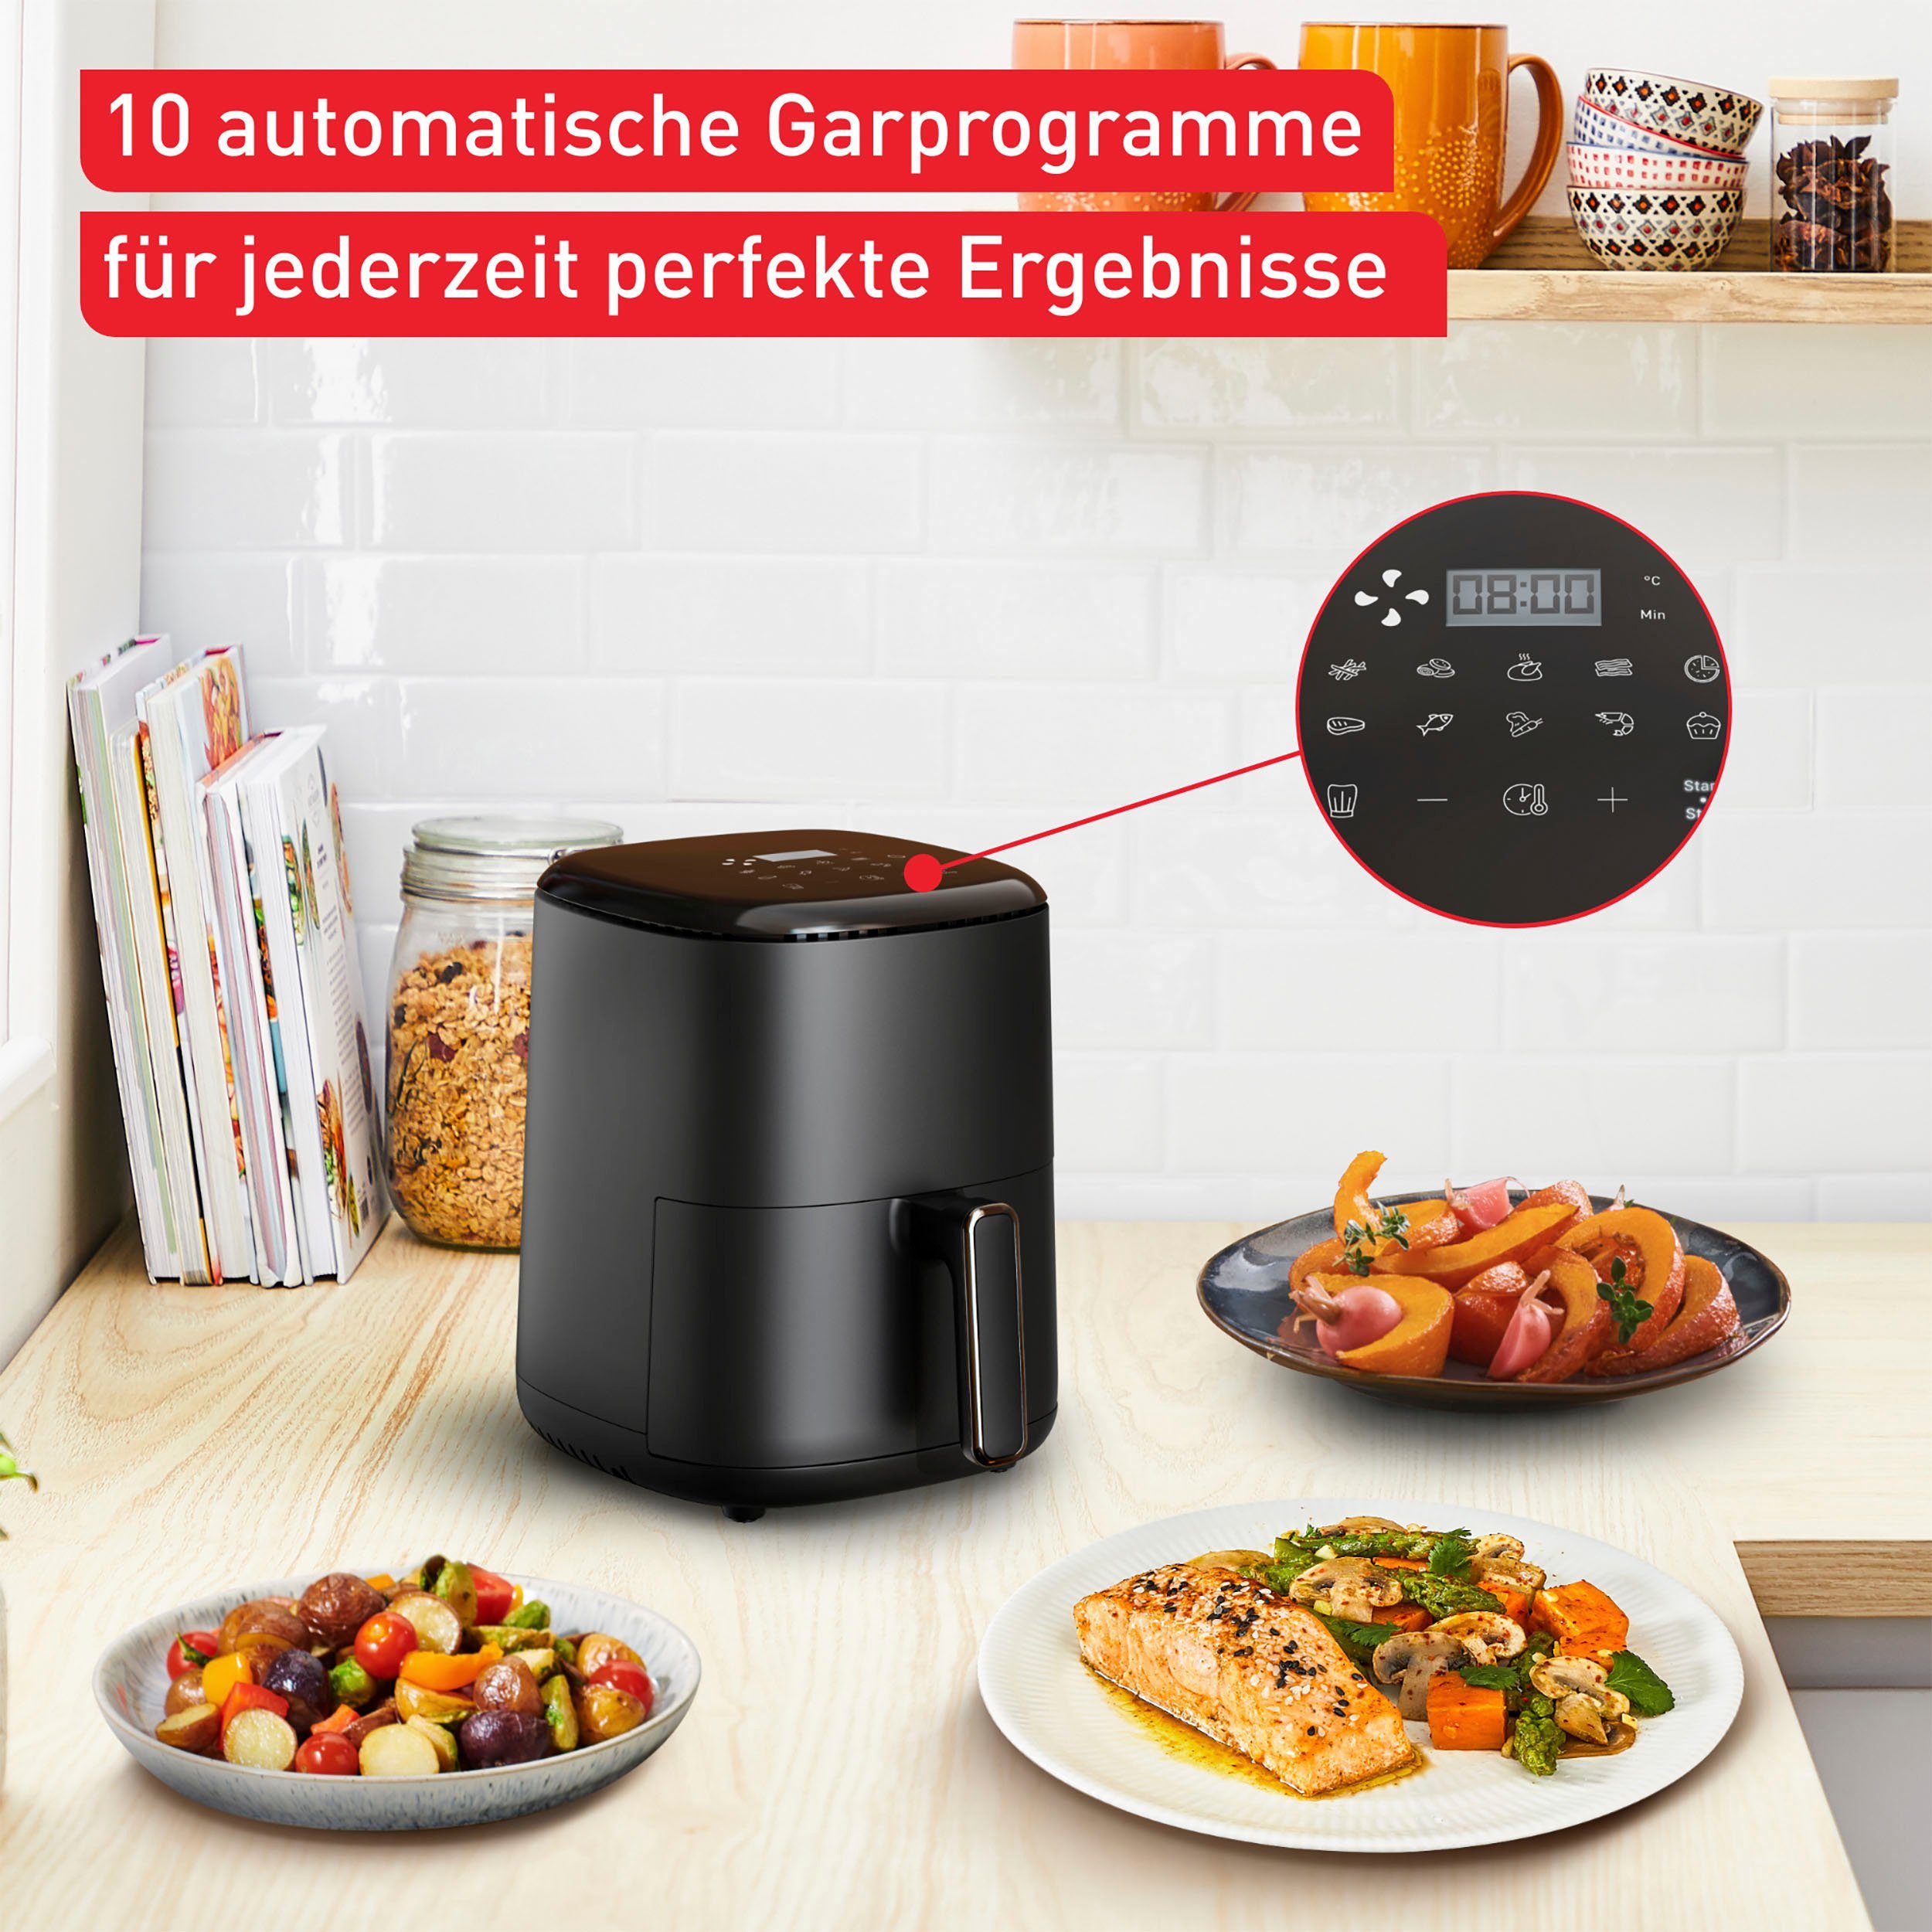 Heißluftfritteuse W Fry Compact, Easy EY1458 1300 Tefal